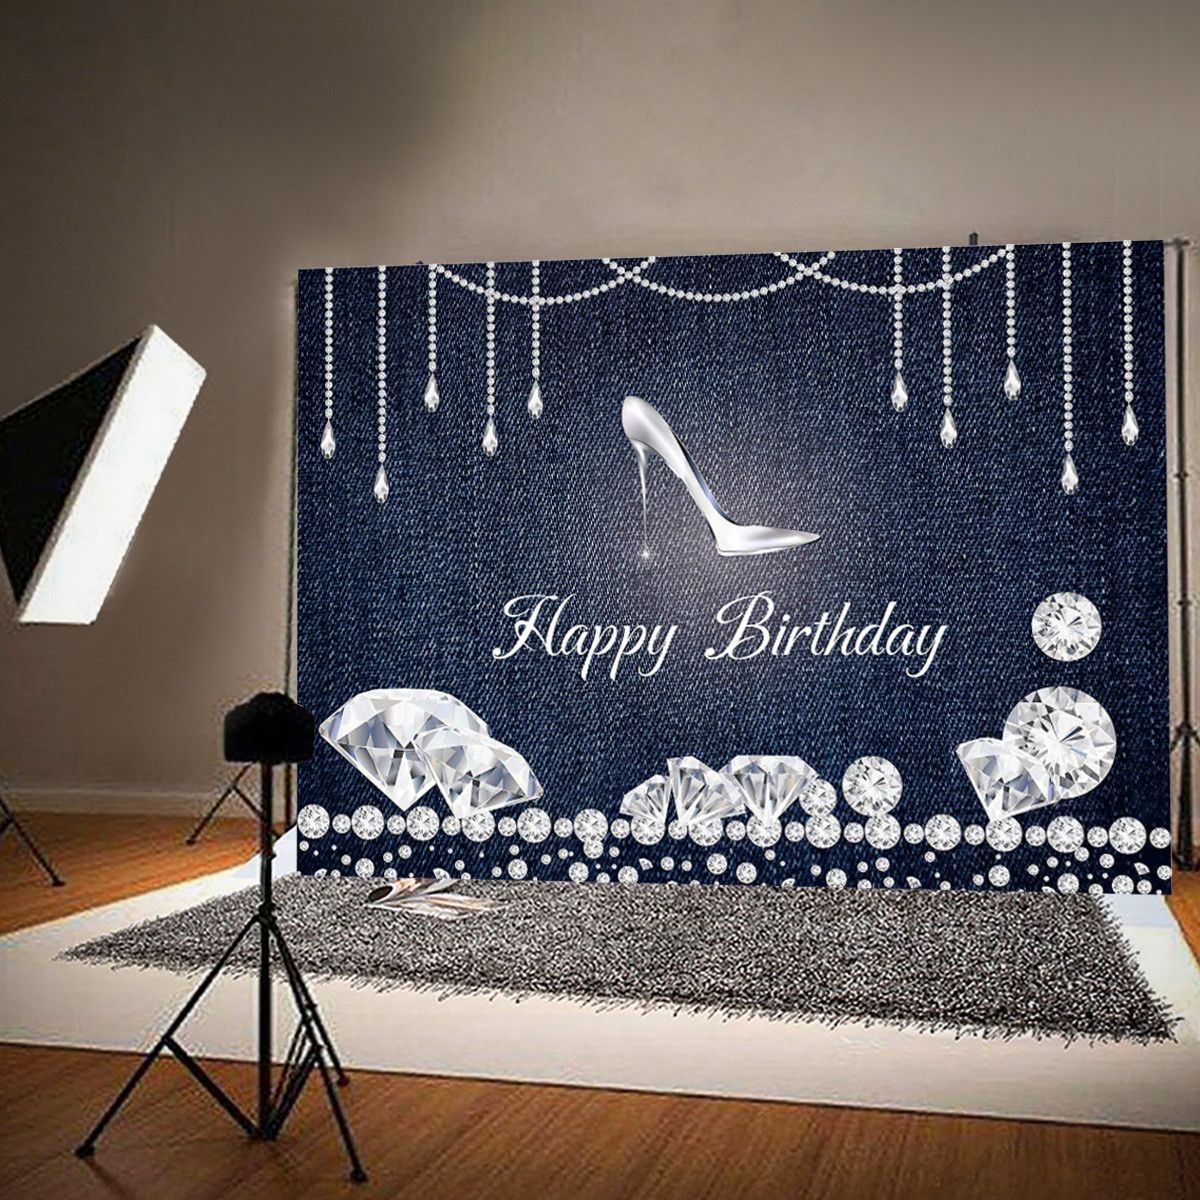 Happy-Birthday-Photography-Backdrop-Photo-Background-Studio-Home-Party-Decor-Props-1821552